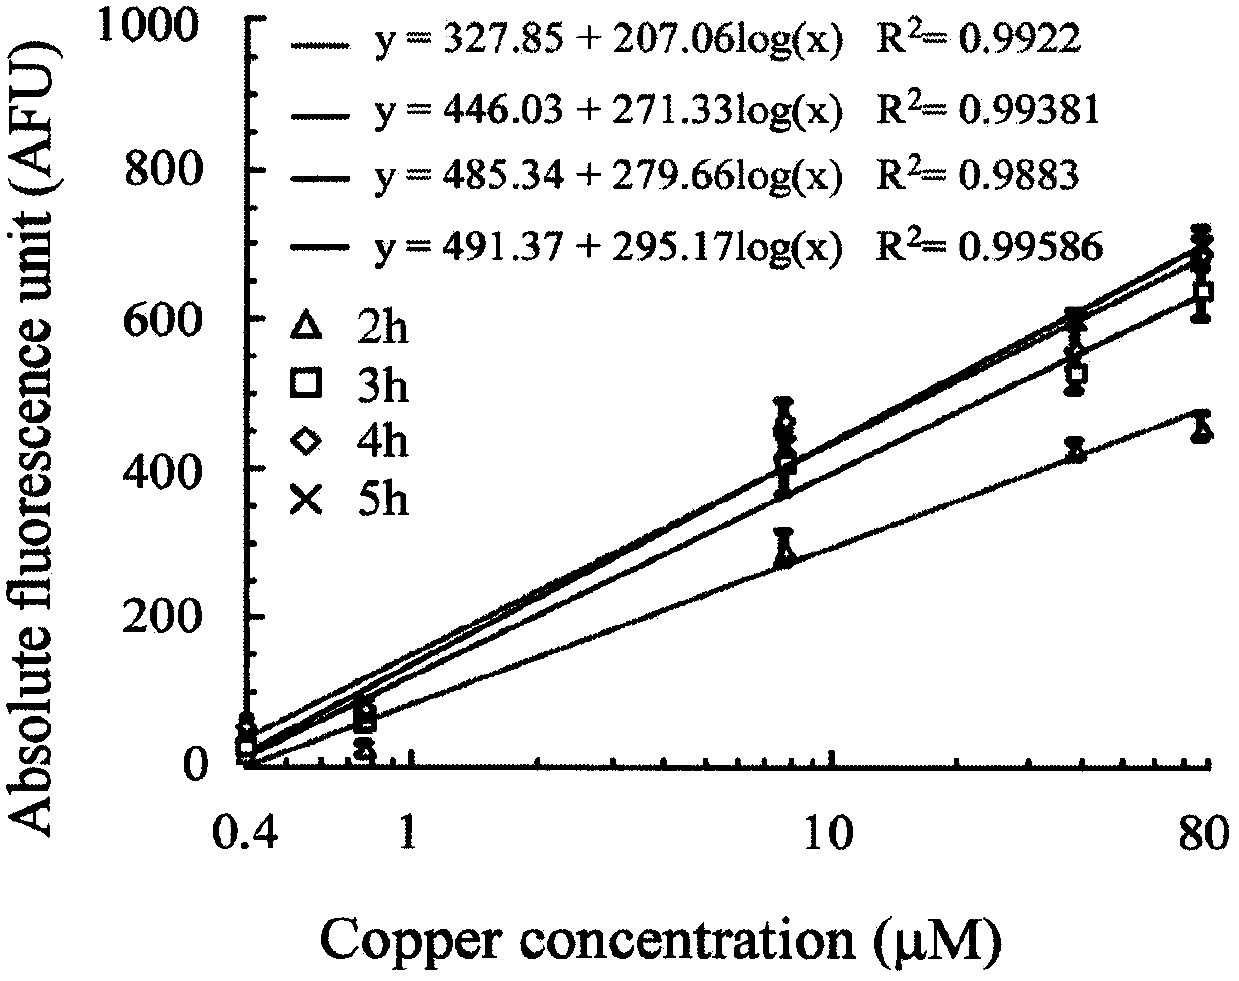 A Microbiological Method for Detecting Heavy Metal Copper in Water